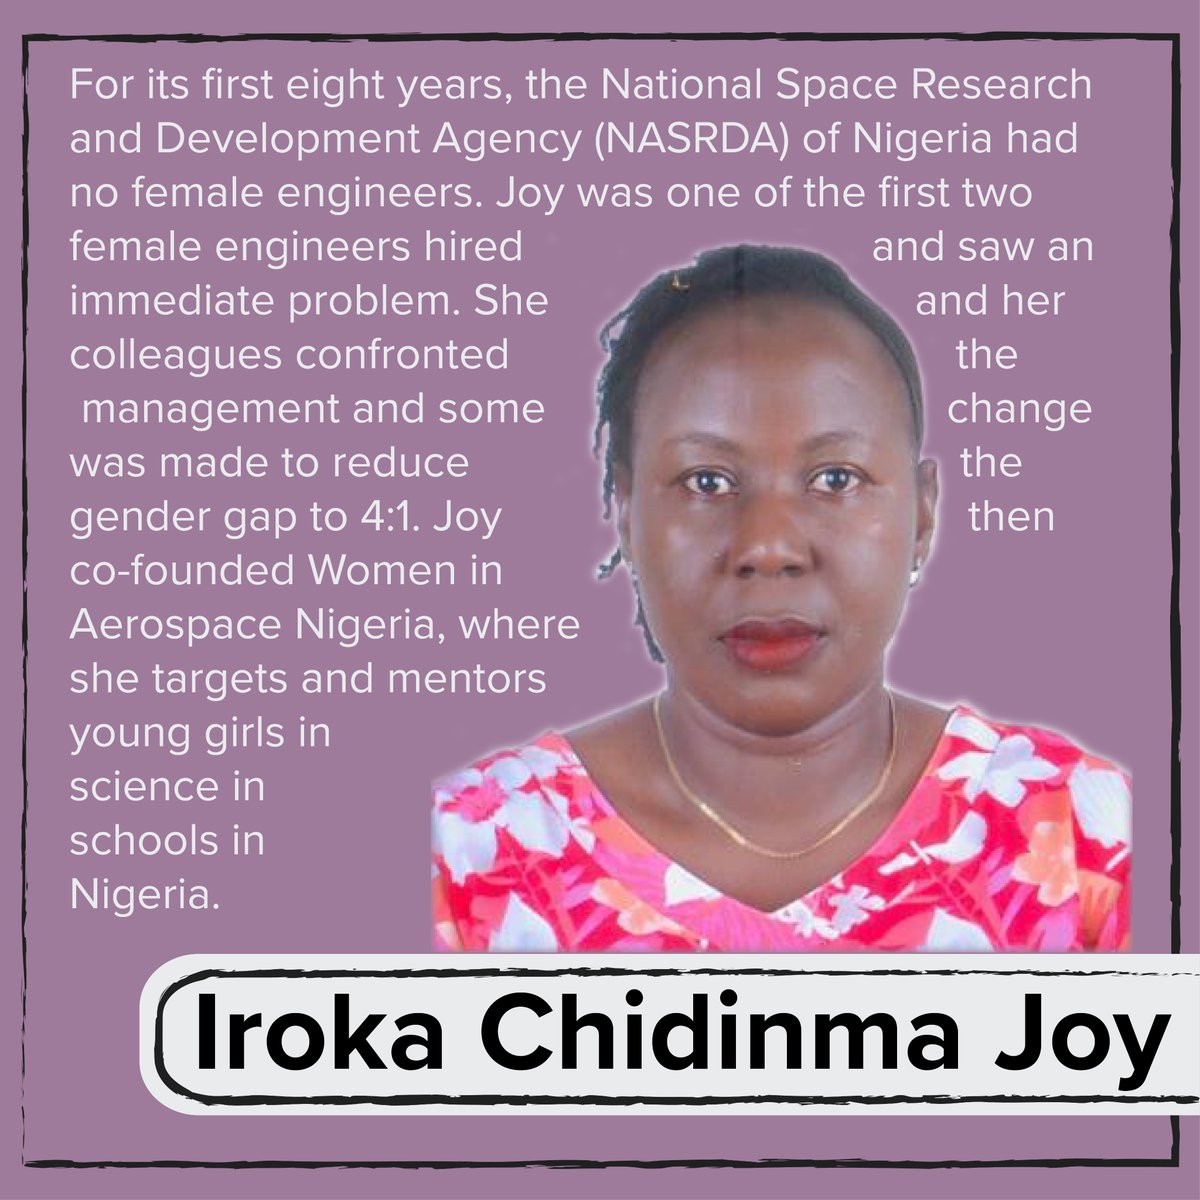 Iroka Chidinma Joy is one of the co-founders of  @AerospaceWomen. As one of the first female engineers hired by  @NASRDA, Joy recognized the need to reduce the gender gap. She now works as an advocate for women in space emerging nations.